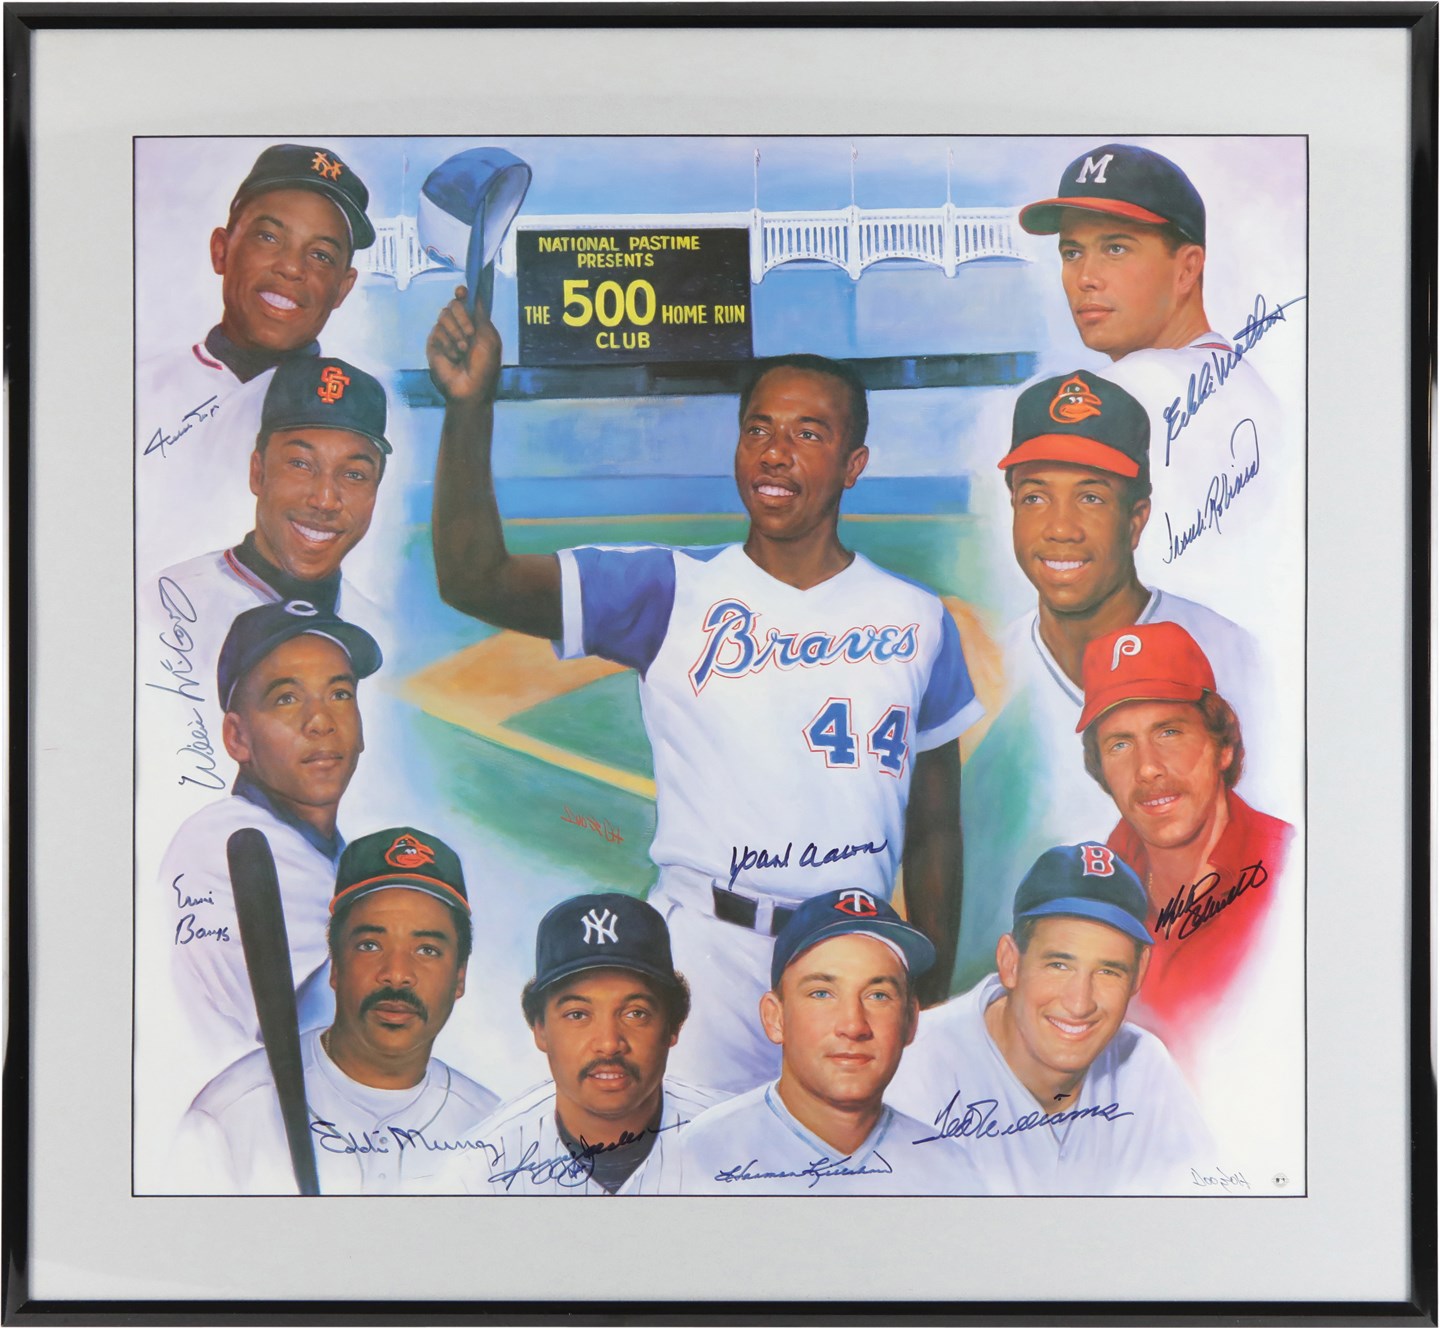 Baseball Autographs - 500 Home Run Club Signed Oversize Lithograph w/Ted Williams